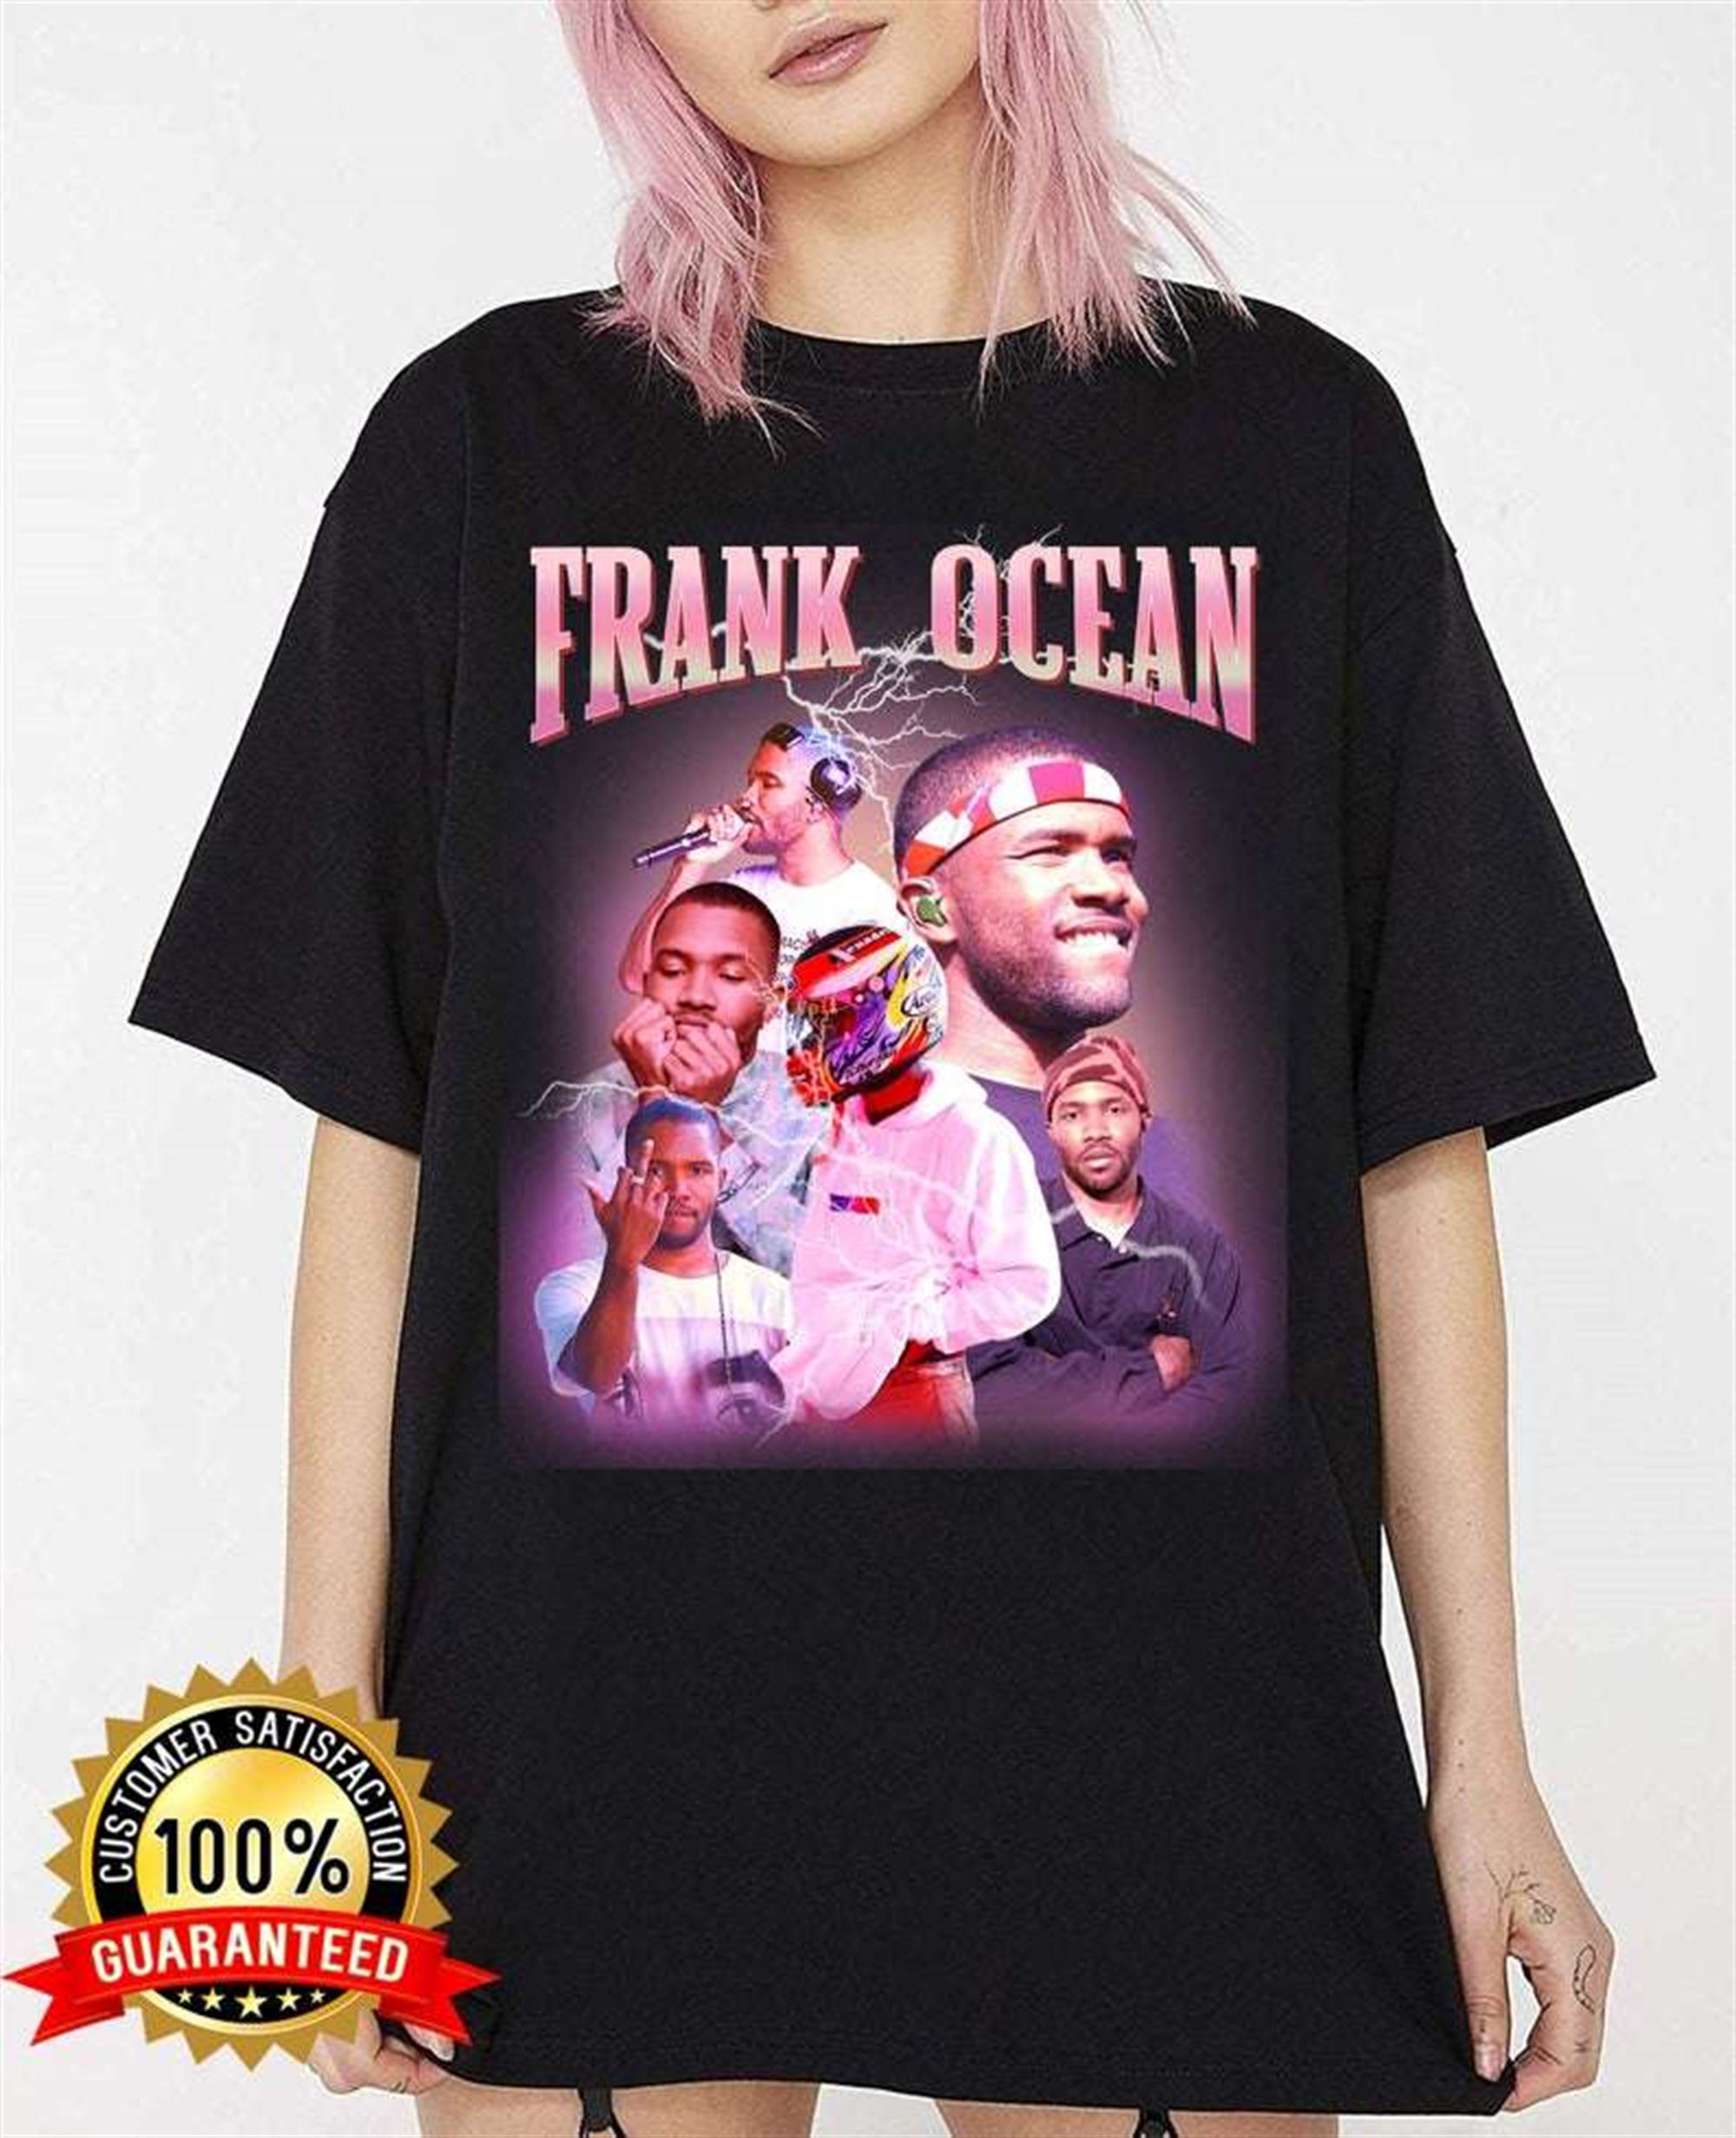 Frank Ocean Blond Graphic T Shirt Plus Size Up To 5xl